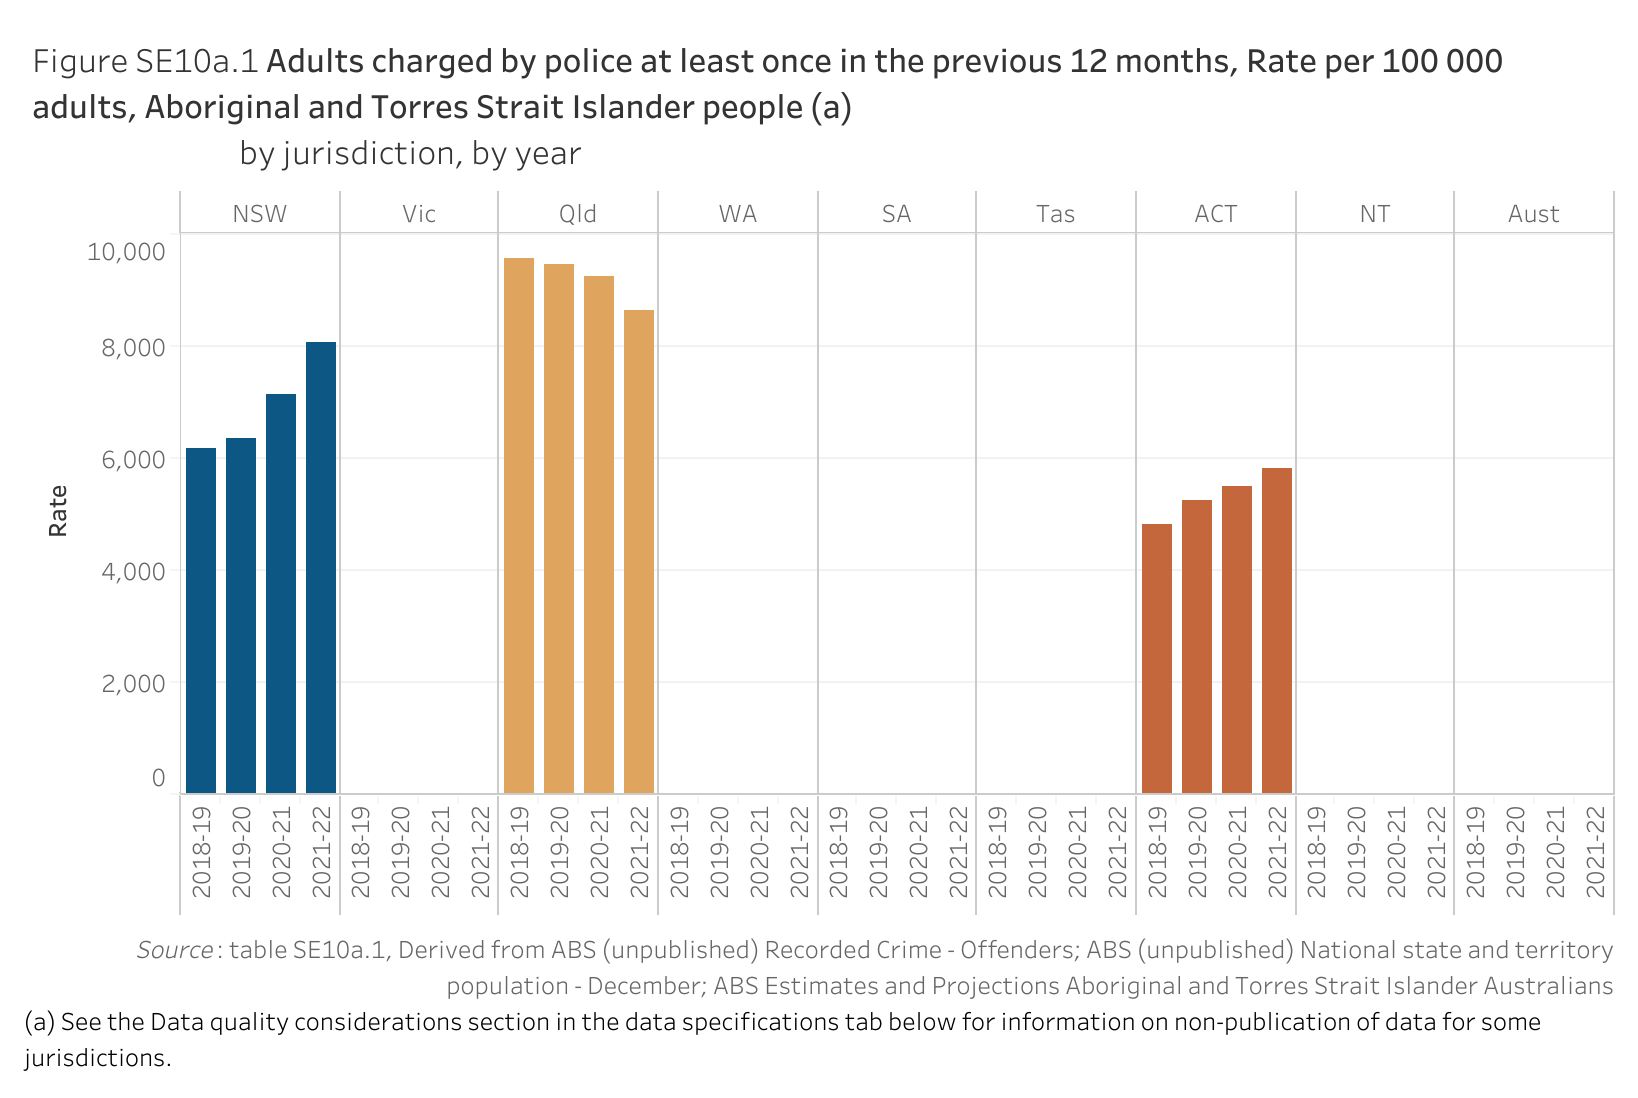 Figure SE10a.1 shows adults charged by police at least once in the previous 12 months, Rate per 100 000 adults, Aboriginal and Torres Strait Islander people, by jurisdiction, by year. More details can be found within the text near this image.